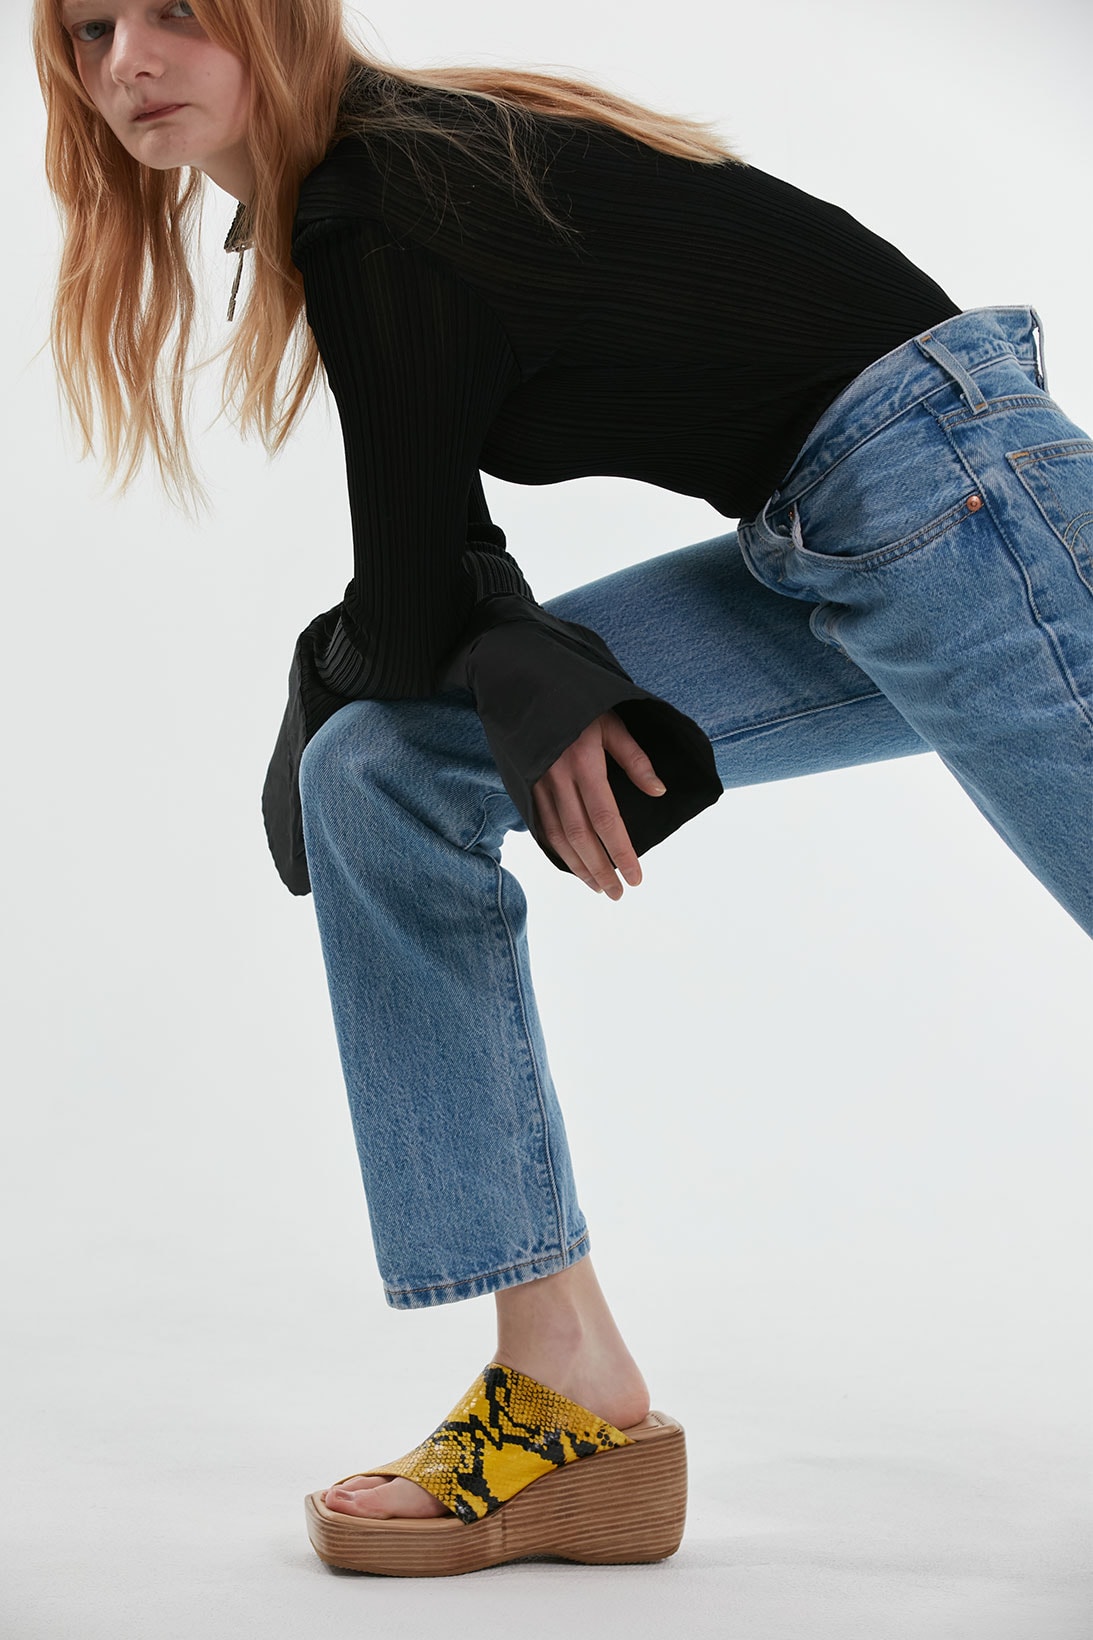 osoi spring summer ss21 collection campaign hustle and bustle mules jeans outfit